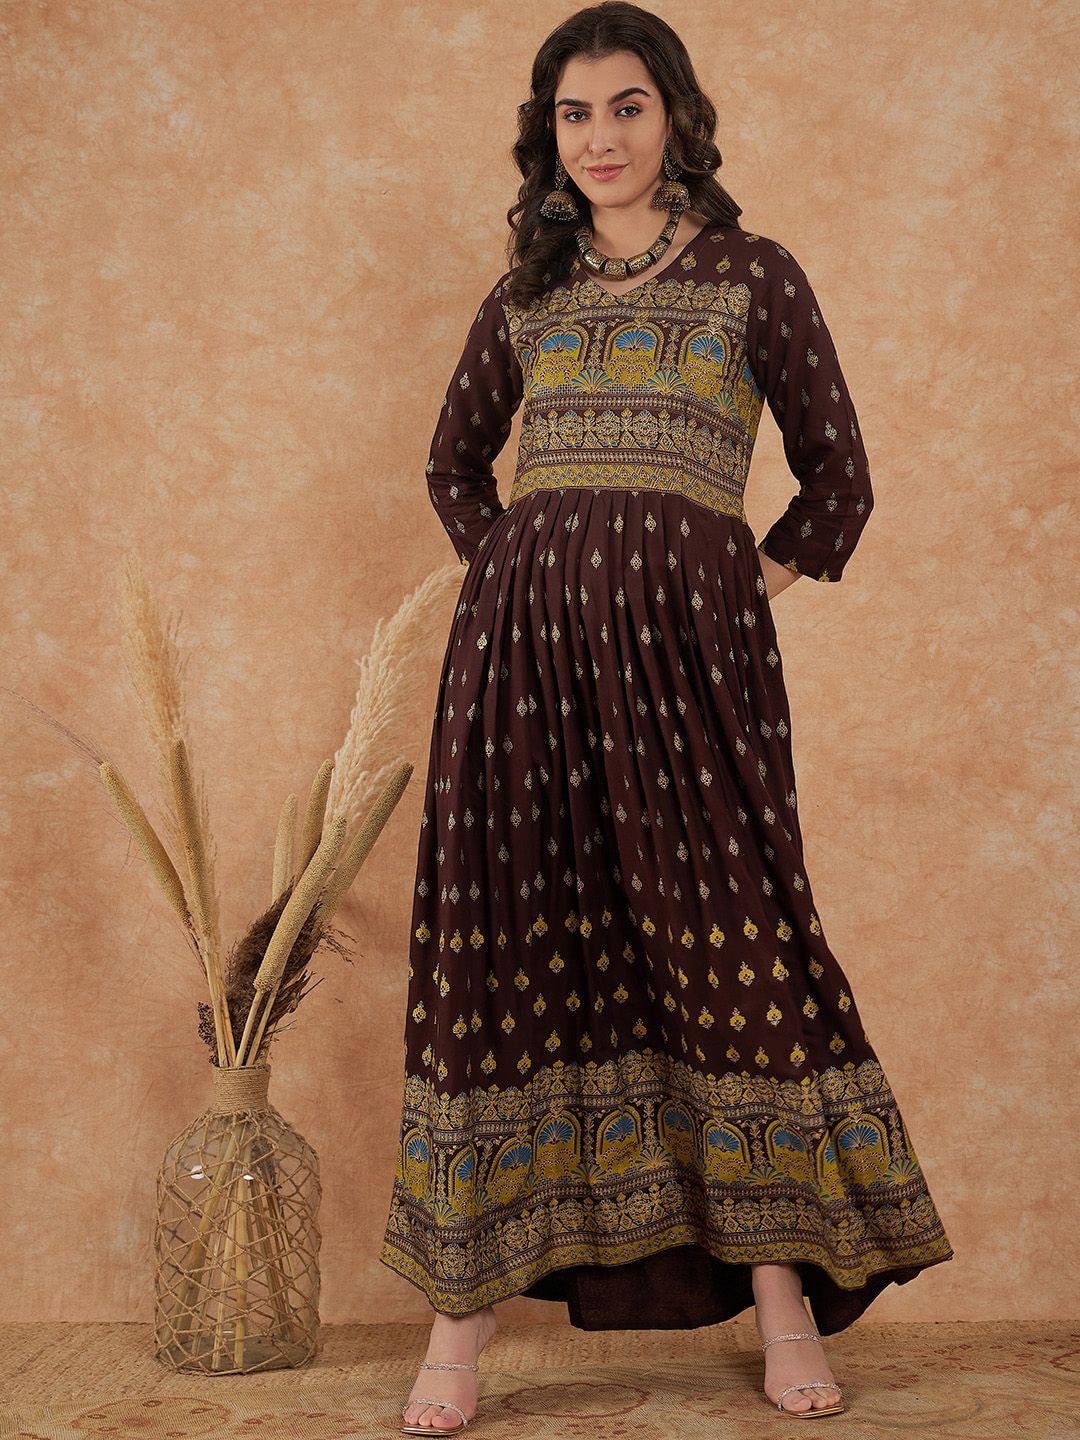 sangria brown & gold toned ethnic motifs printed v neck gathered maxi ethnic dress